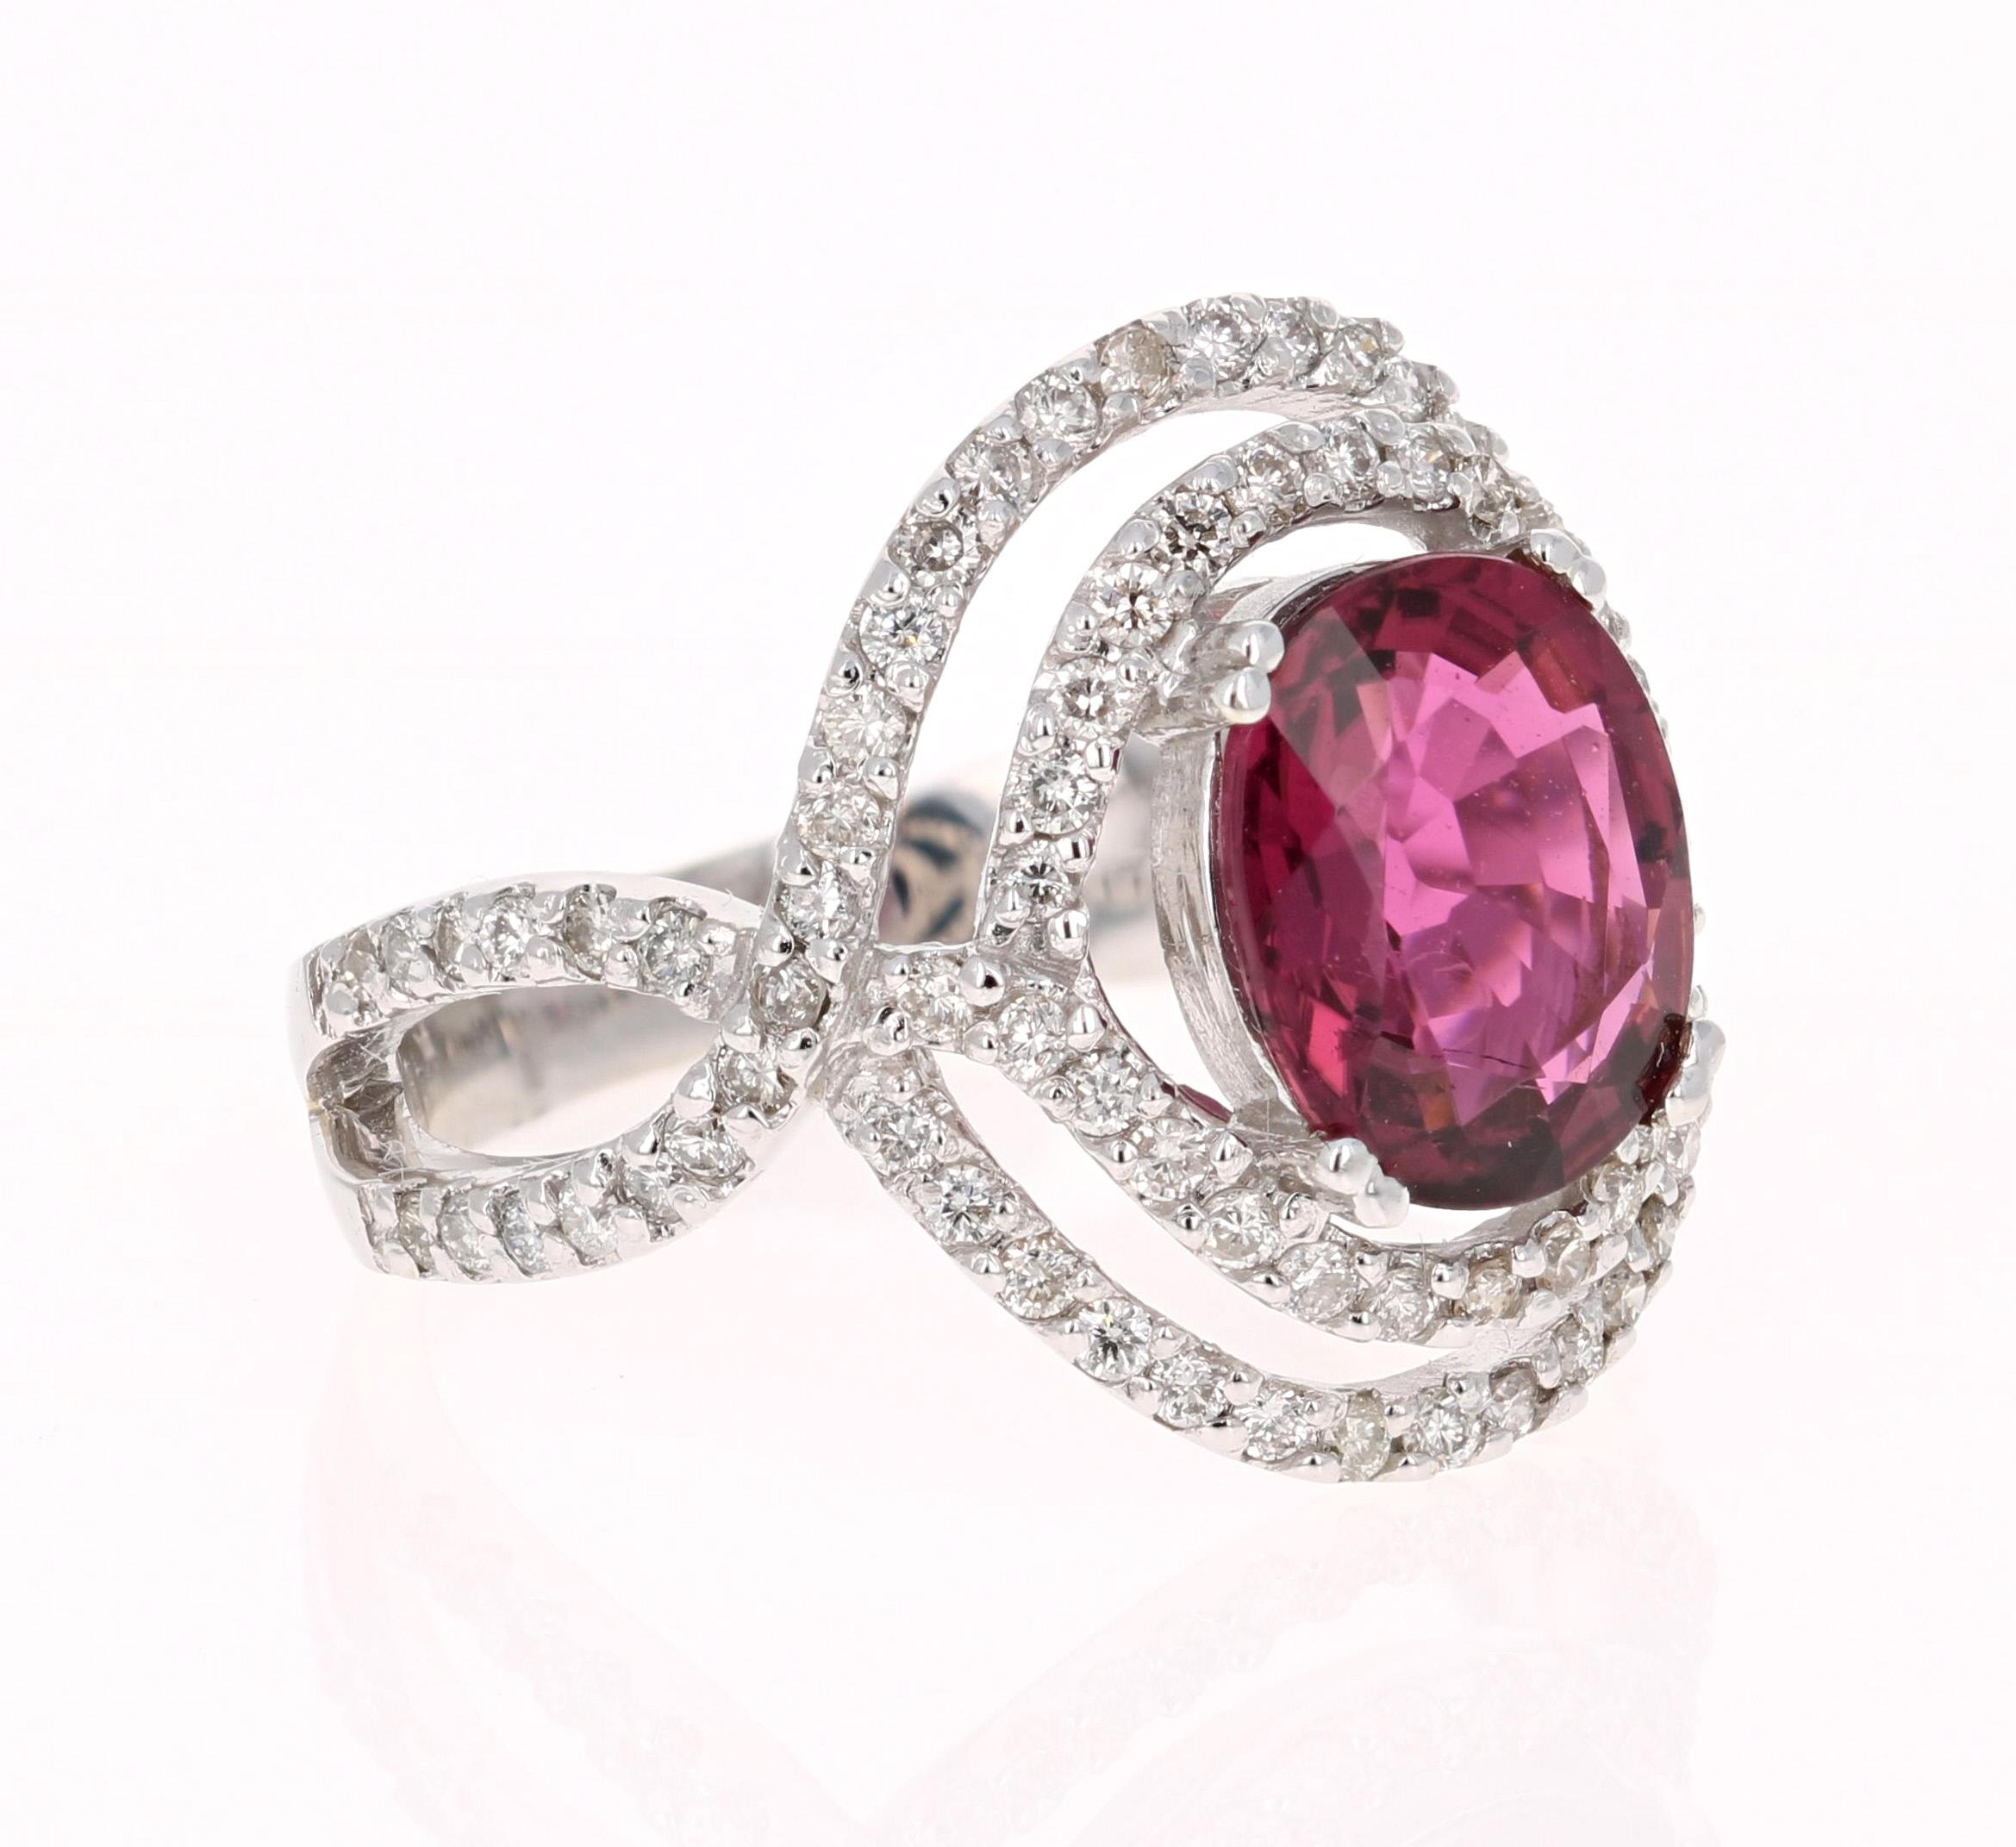 Contemporary 3.15 Carat Oval Cut Pink Tourmaline Diamond White Gold Cocktail Ring